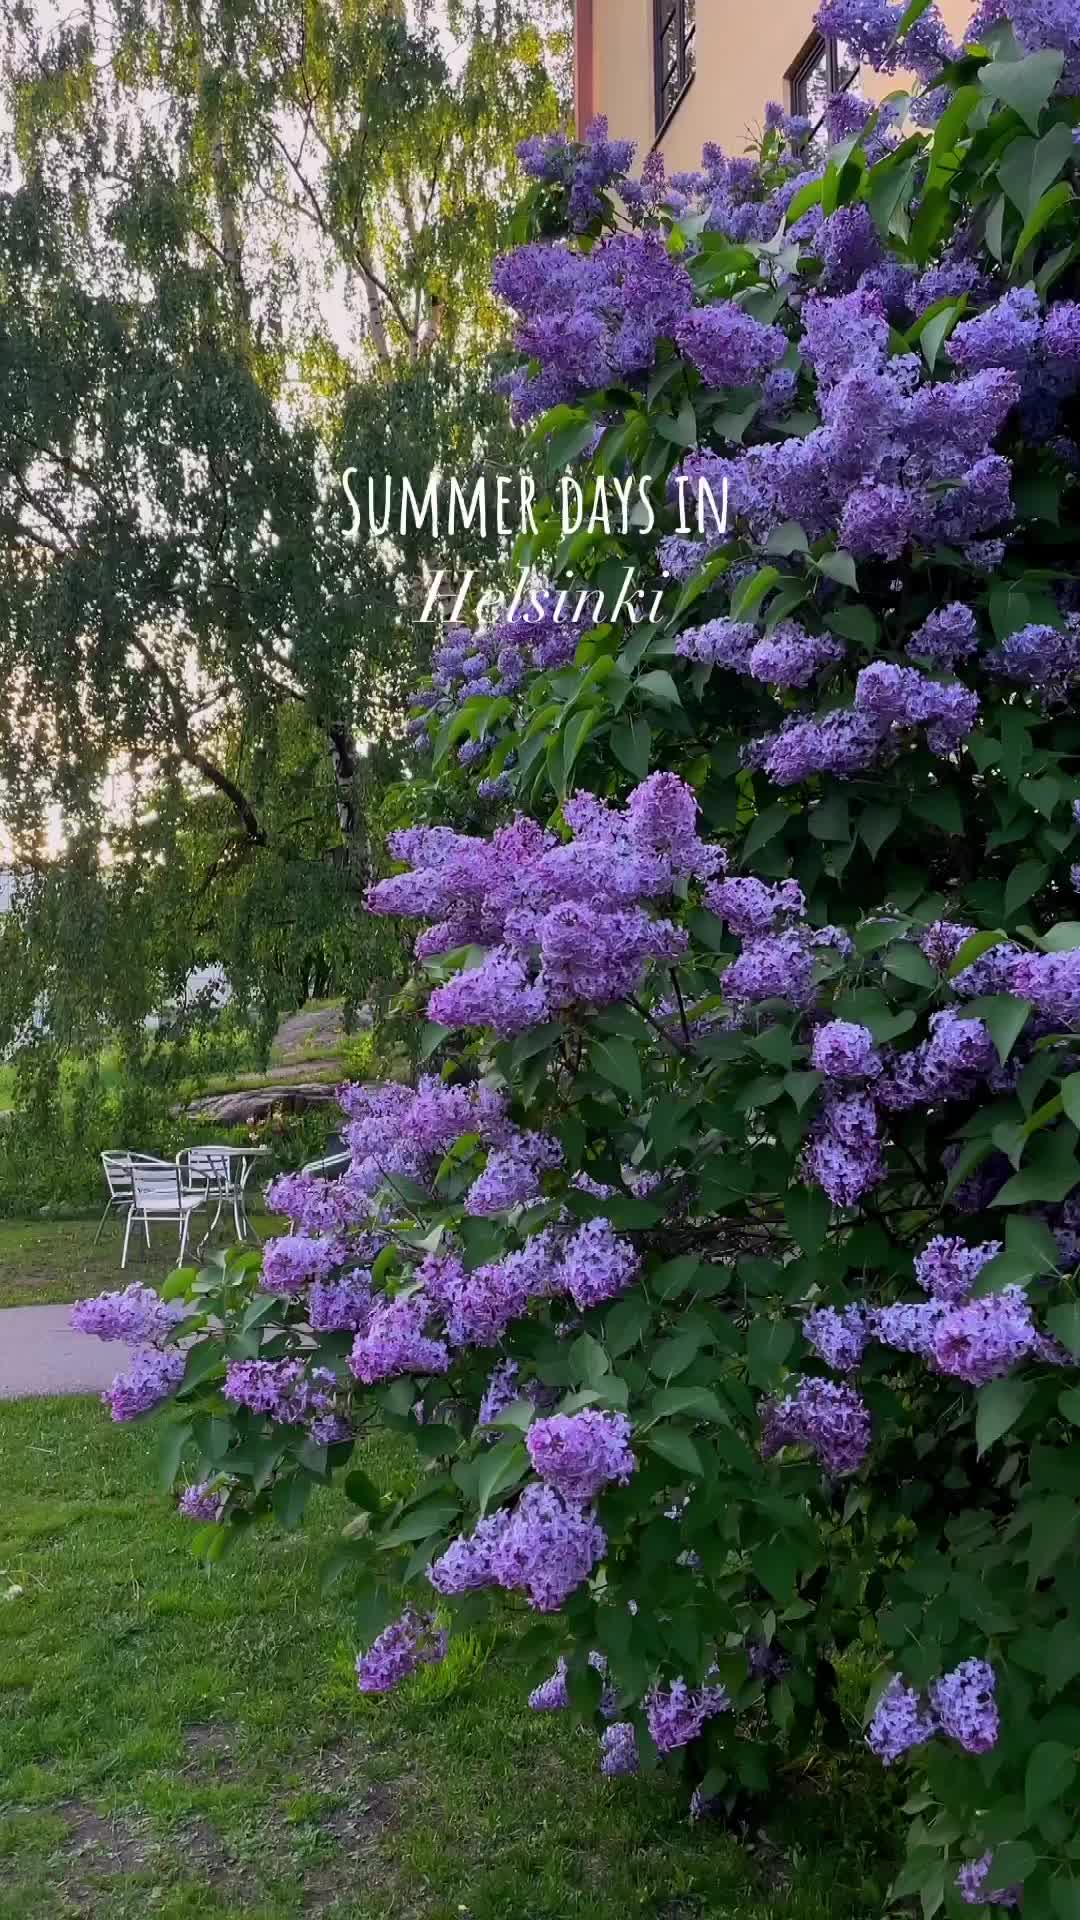 Who else loves Helsinki summer as much as I do? ☀️

Despite the recent rain, there’s still plenty of Helsinki summer left to cherish before autumn arrives! 

Take advantage of the remaining sunny days and indulge in some picnic time. Don’t miss out on soaking up the sun while you still can :)

#summerinfinland #helsinkiofficial #bestinhel #helsinki #europeansummer  #finland4seasons #visitingfinland #thisisfinland